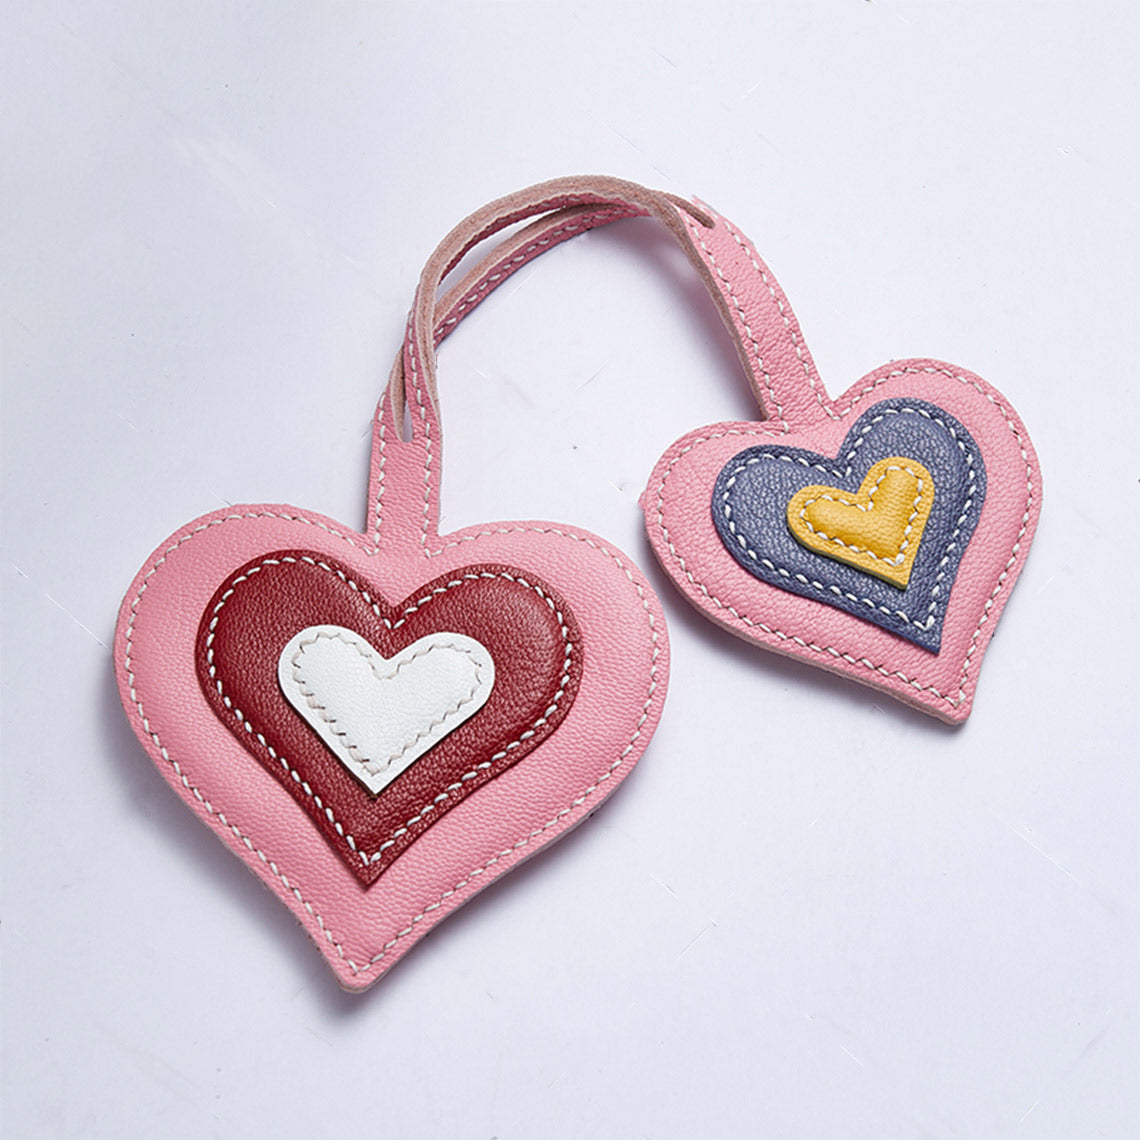 Handmade Pink Heart Backpack Charm | DIY Bag Accessories Purse Charm Kit - POPSEWING™